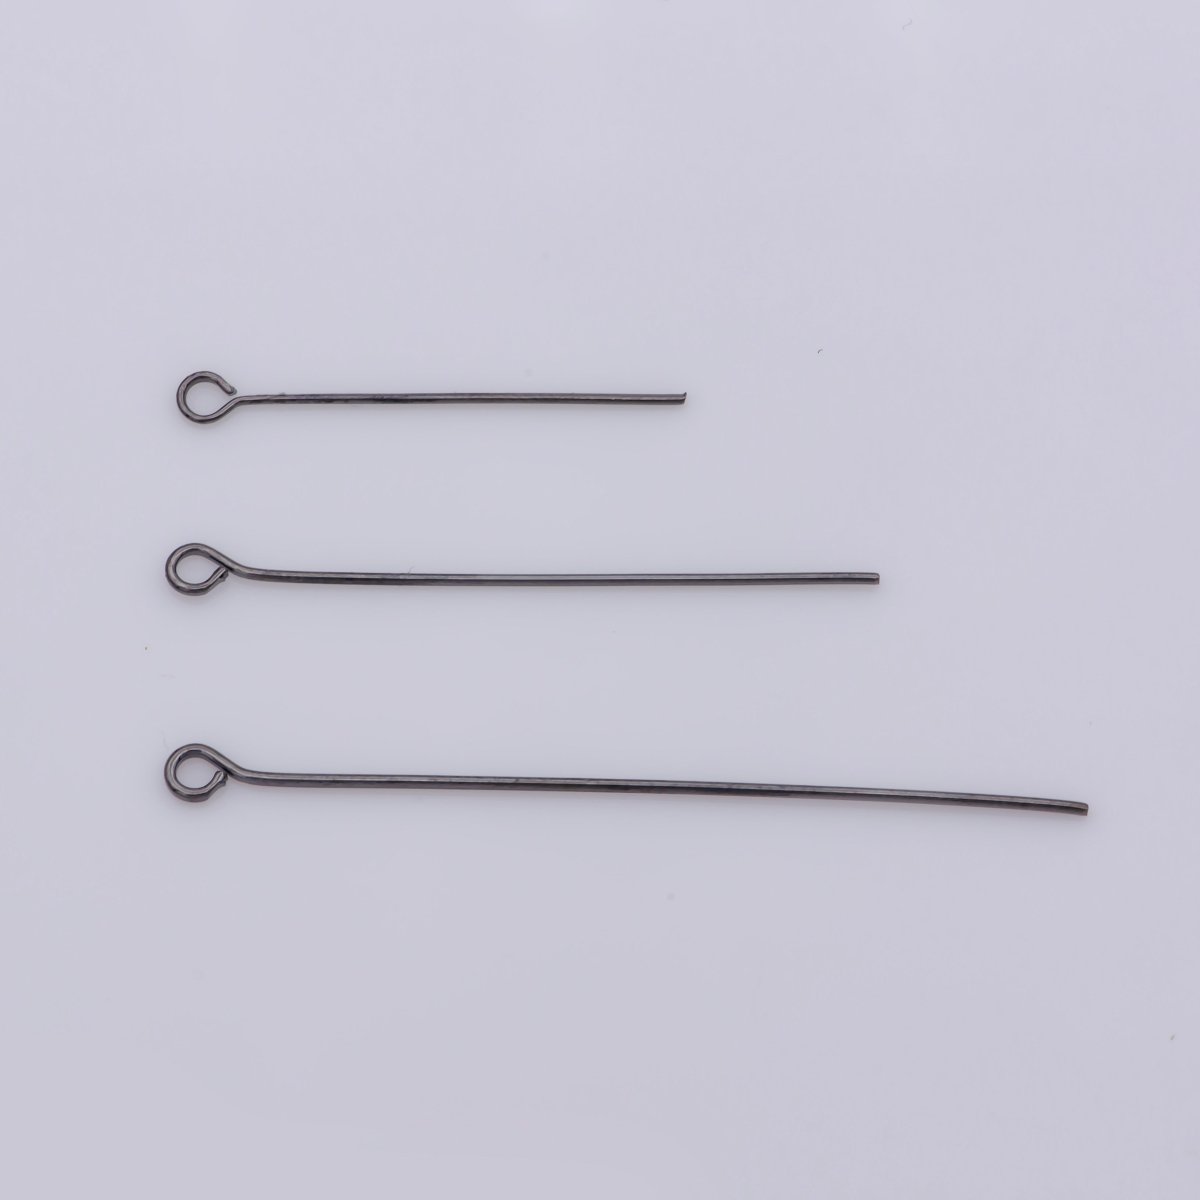 Gold Eye Pin Open Eyepins Headpins 0.5mm (24 Gauge) by 25, 35, 45mm Jewelry Making Craft Supply DIY Finding L-548 L-554 L-555 - DLUXCA